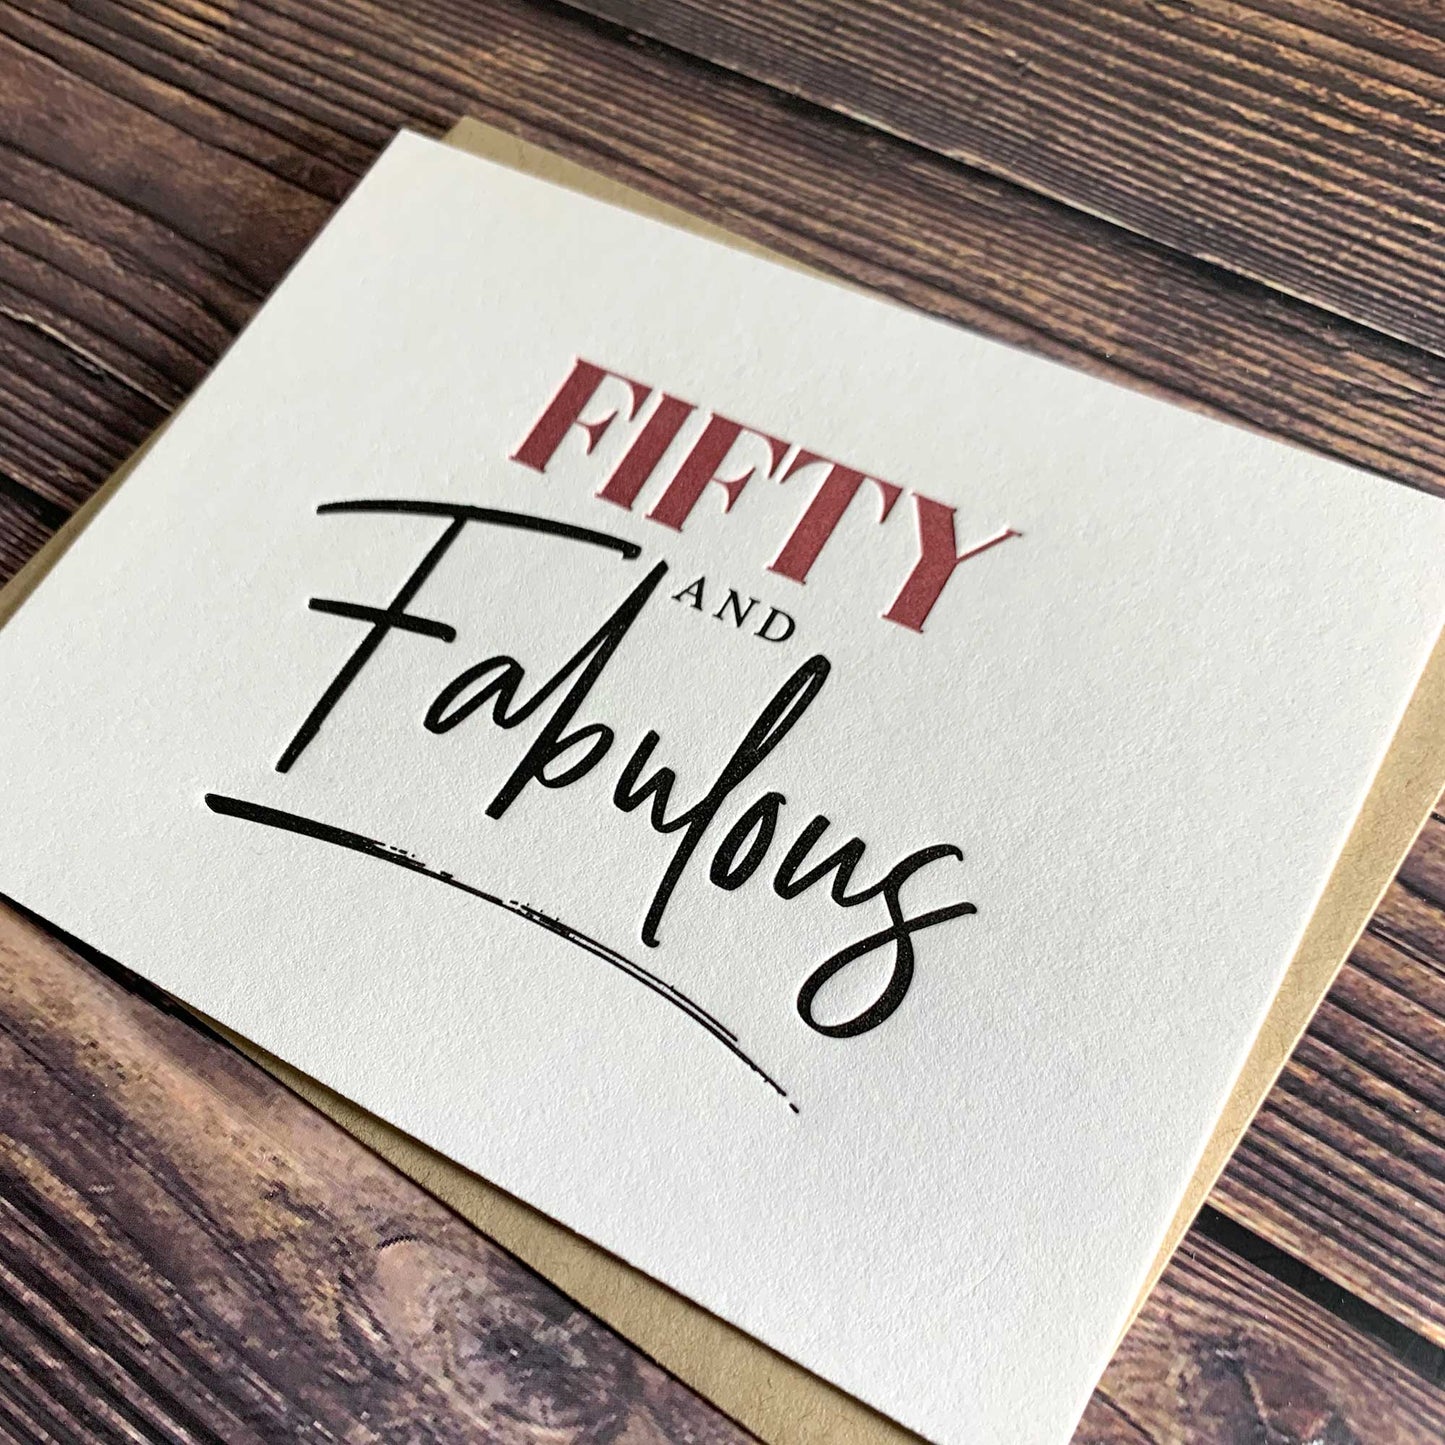 Fifty and Fabulous Birthday Card, Letterpress printed, includes envelope